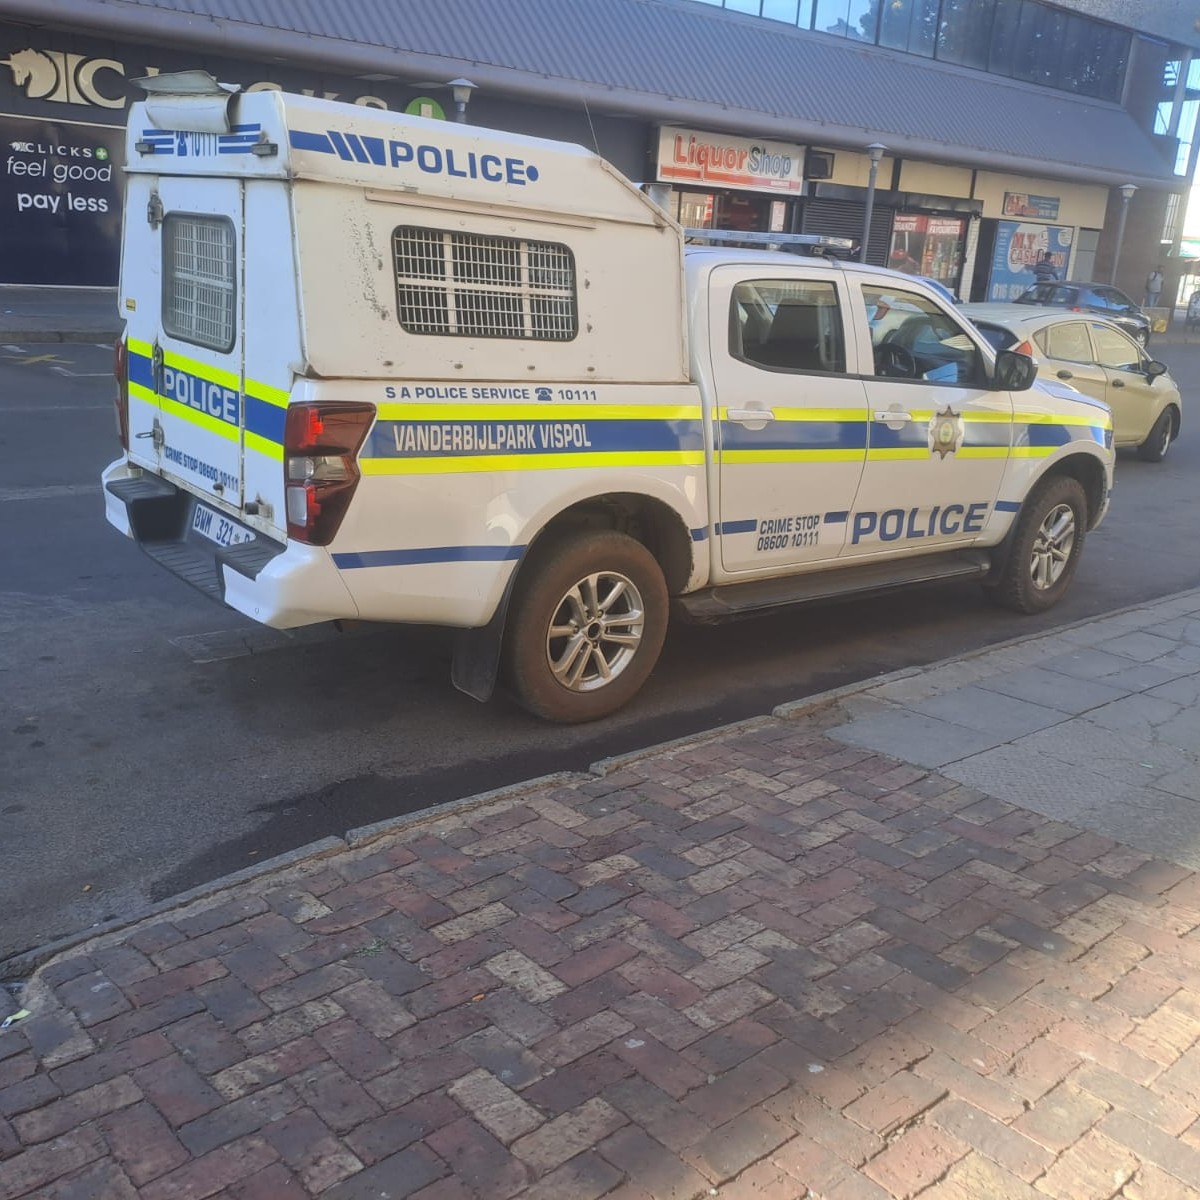 Fidelity ADT Vaal swiftly responded to a theft report at Mr Price and Vaal Walk yesterday. Our Security Officer apprehended the suspect, who was then handed over to SAPS. Great job! #FidelityADT #Vaal #keepingwatch #visibility #WeAreFidelity